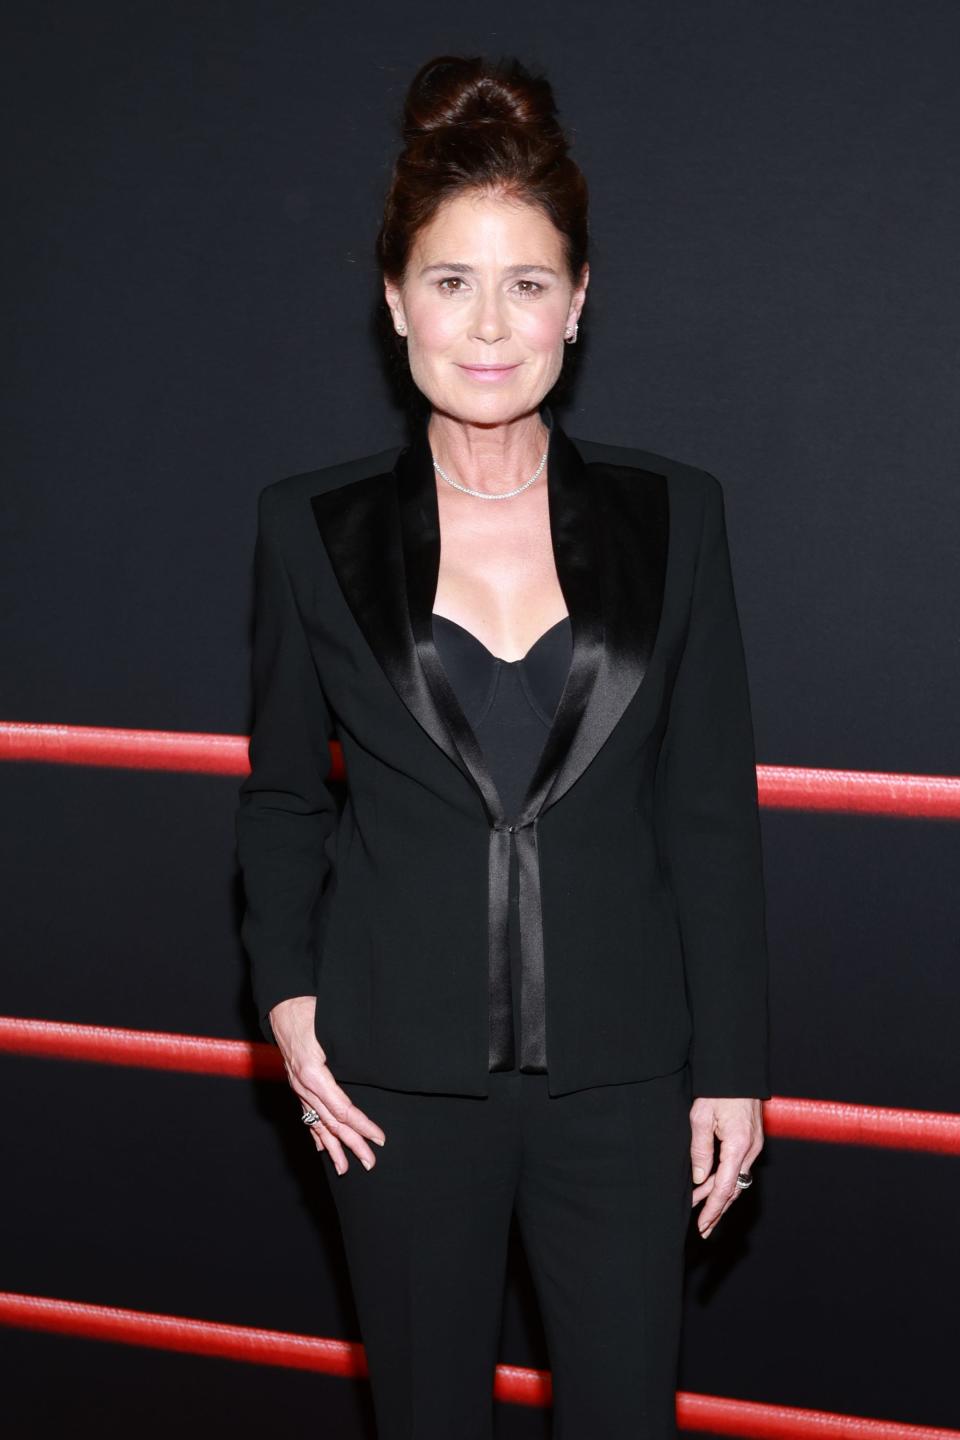 Maura Tierney in a black suit at "The Iron Claw" premiere